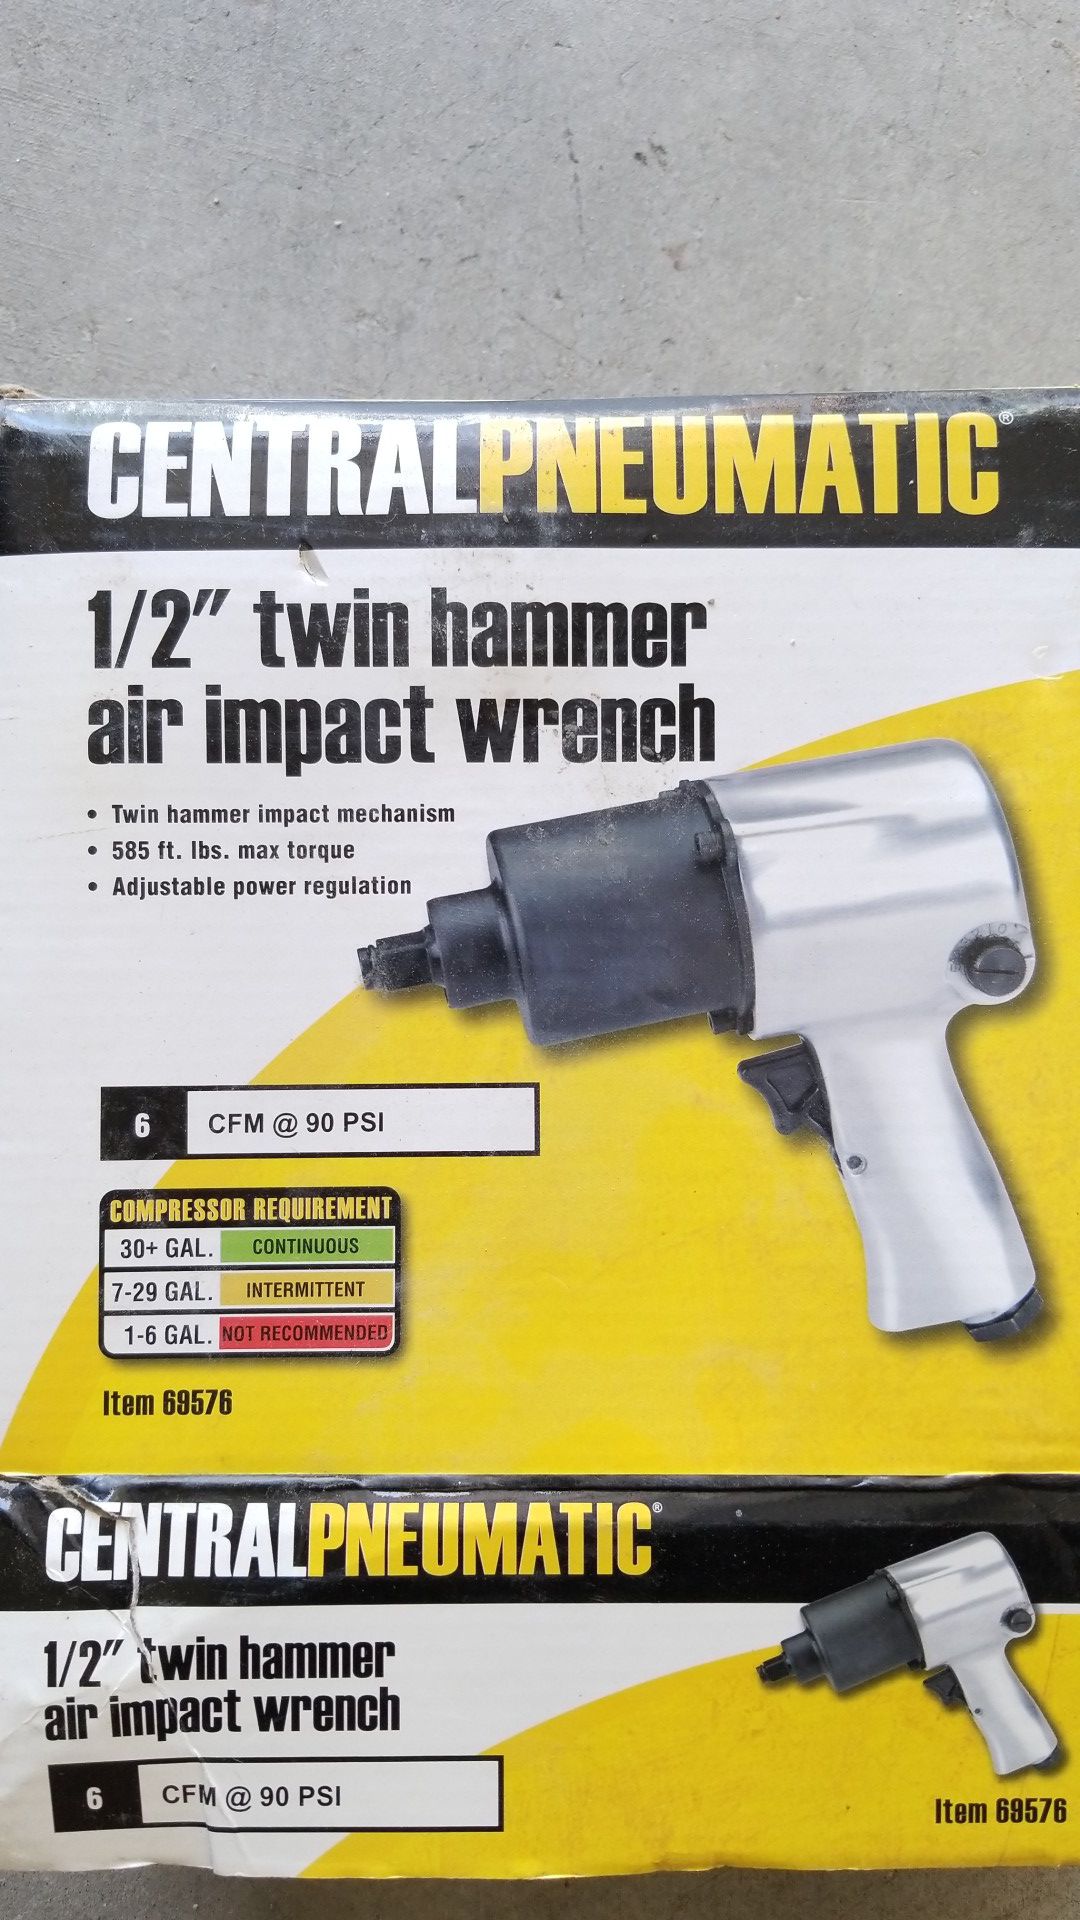 NEW IN BOX..1/2" TWIN HAMMER AIR IMPACT WRENCH